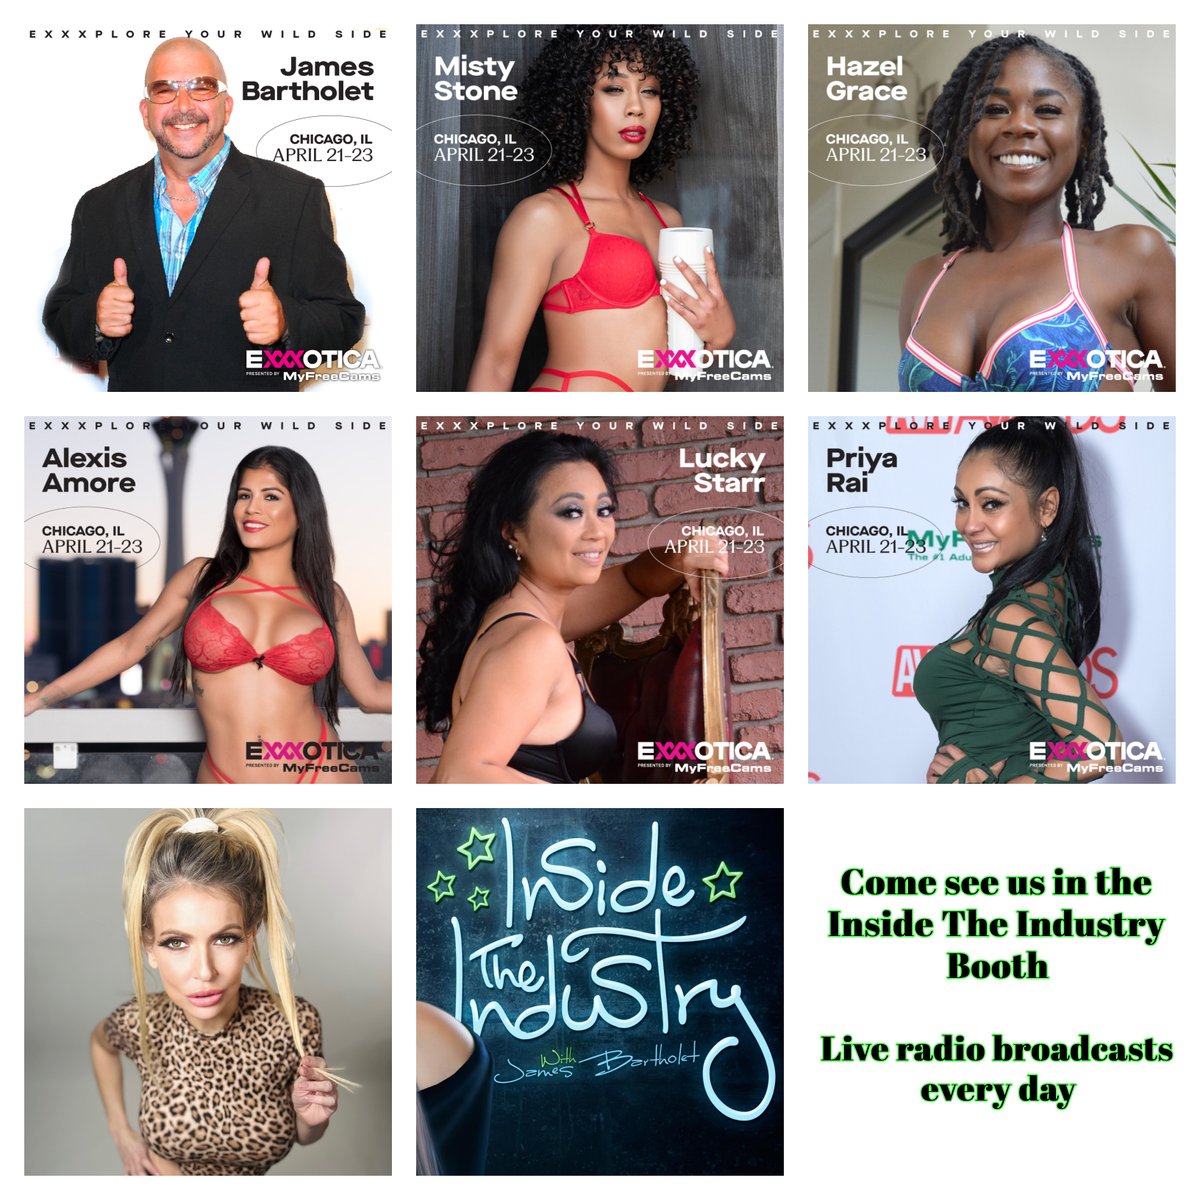 We've got a great lineup of stars for @exxxotica Chicago. Come see us April 21st 22nd 23rd